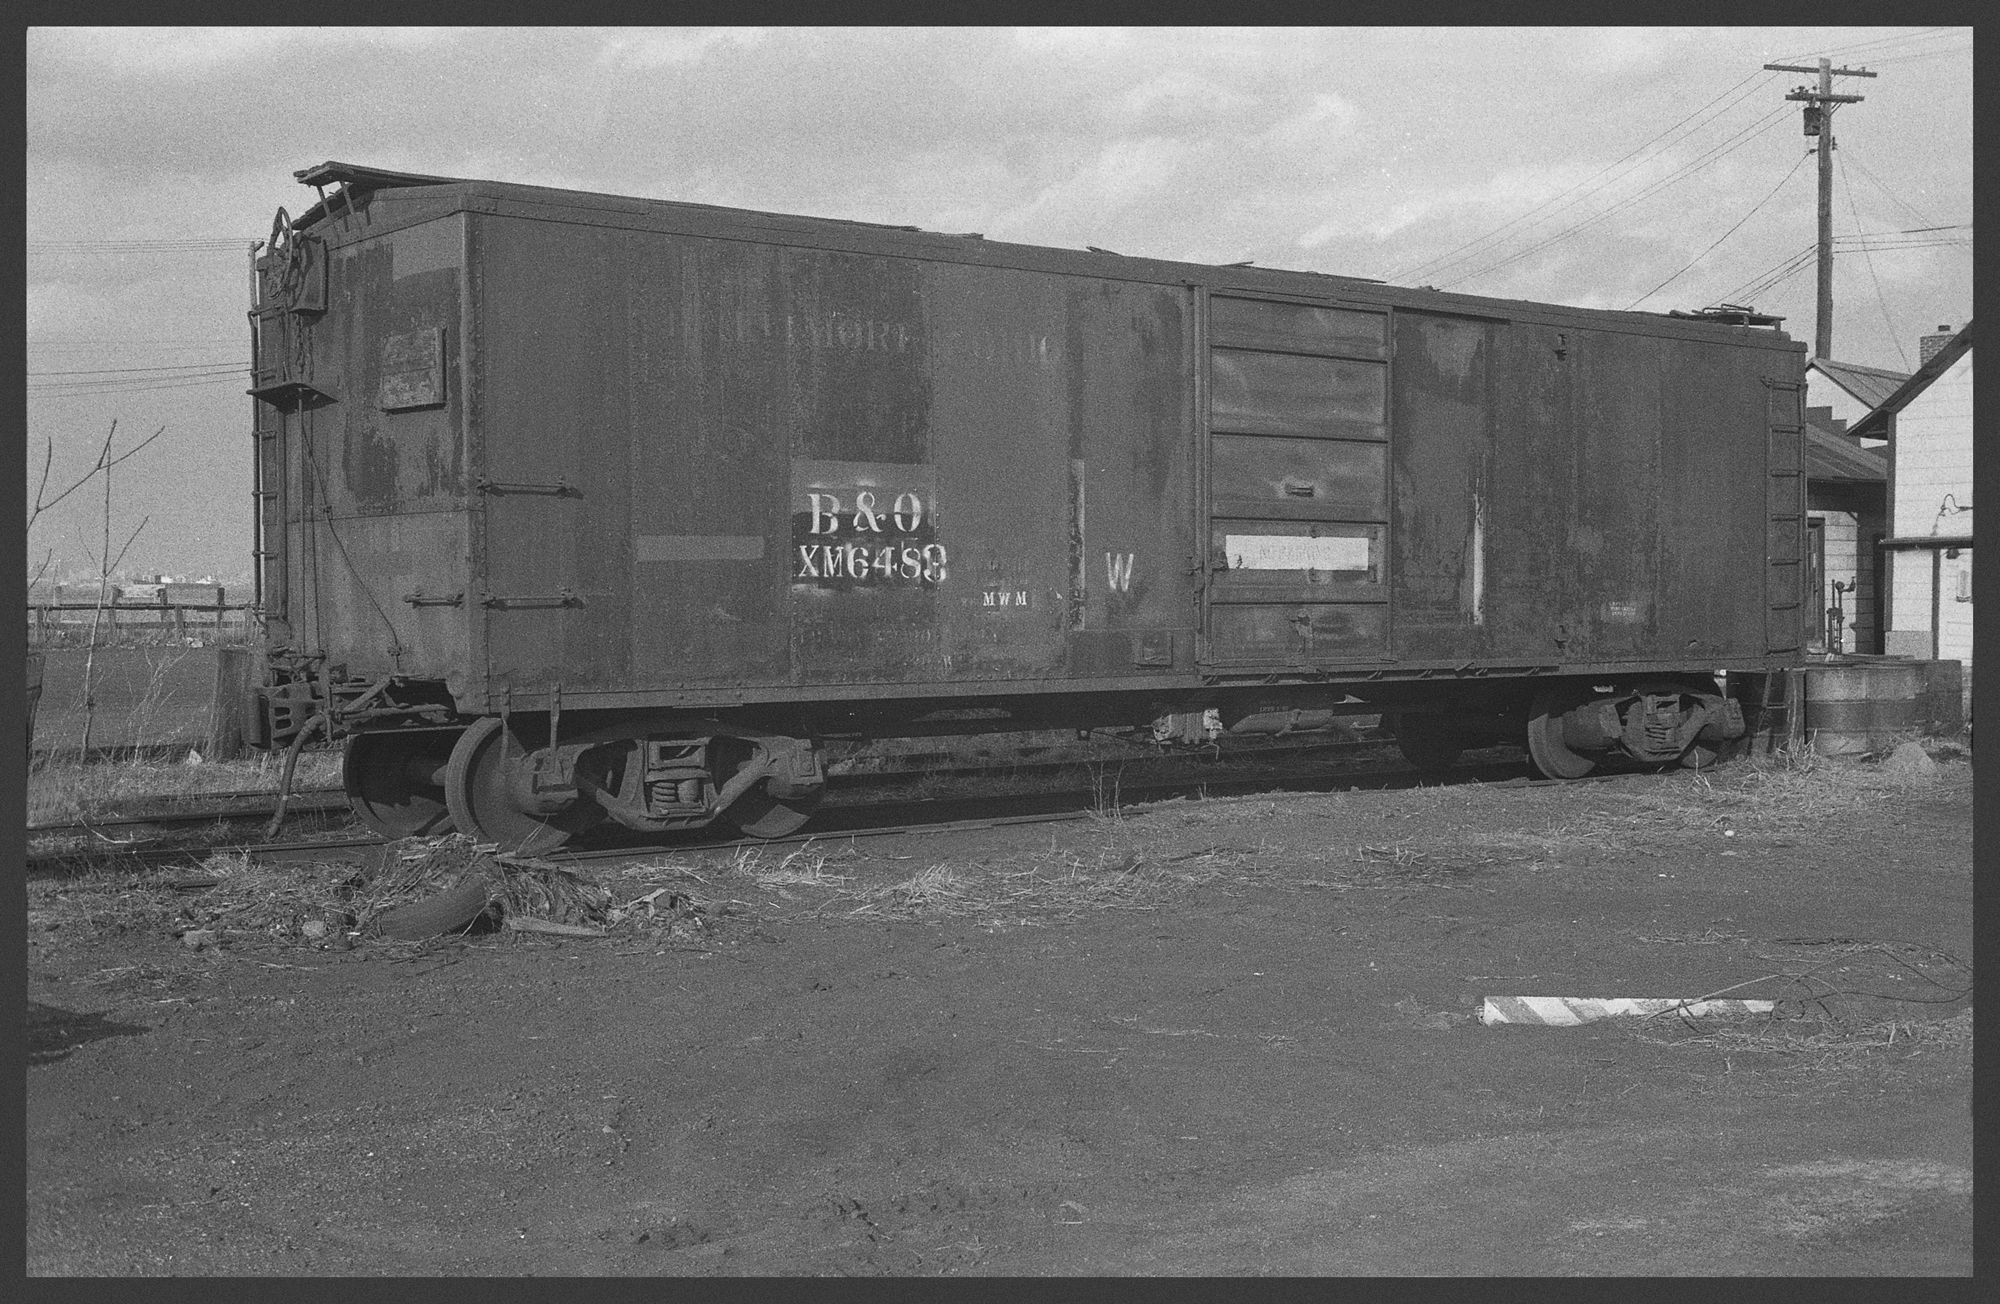 images/The_Lonely_Boxcar.jpg